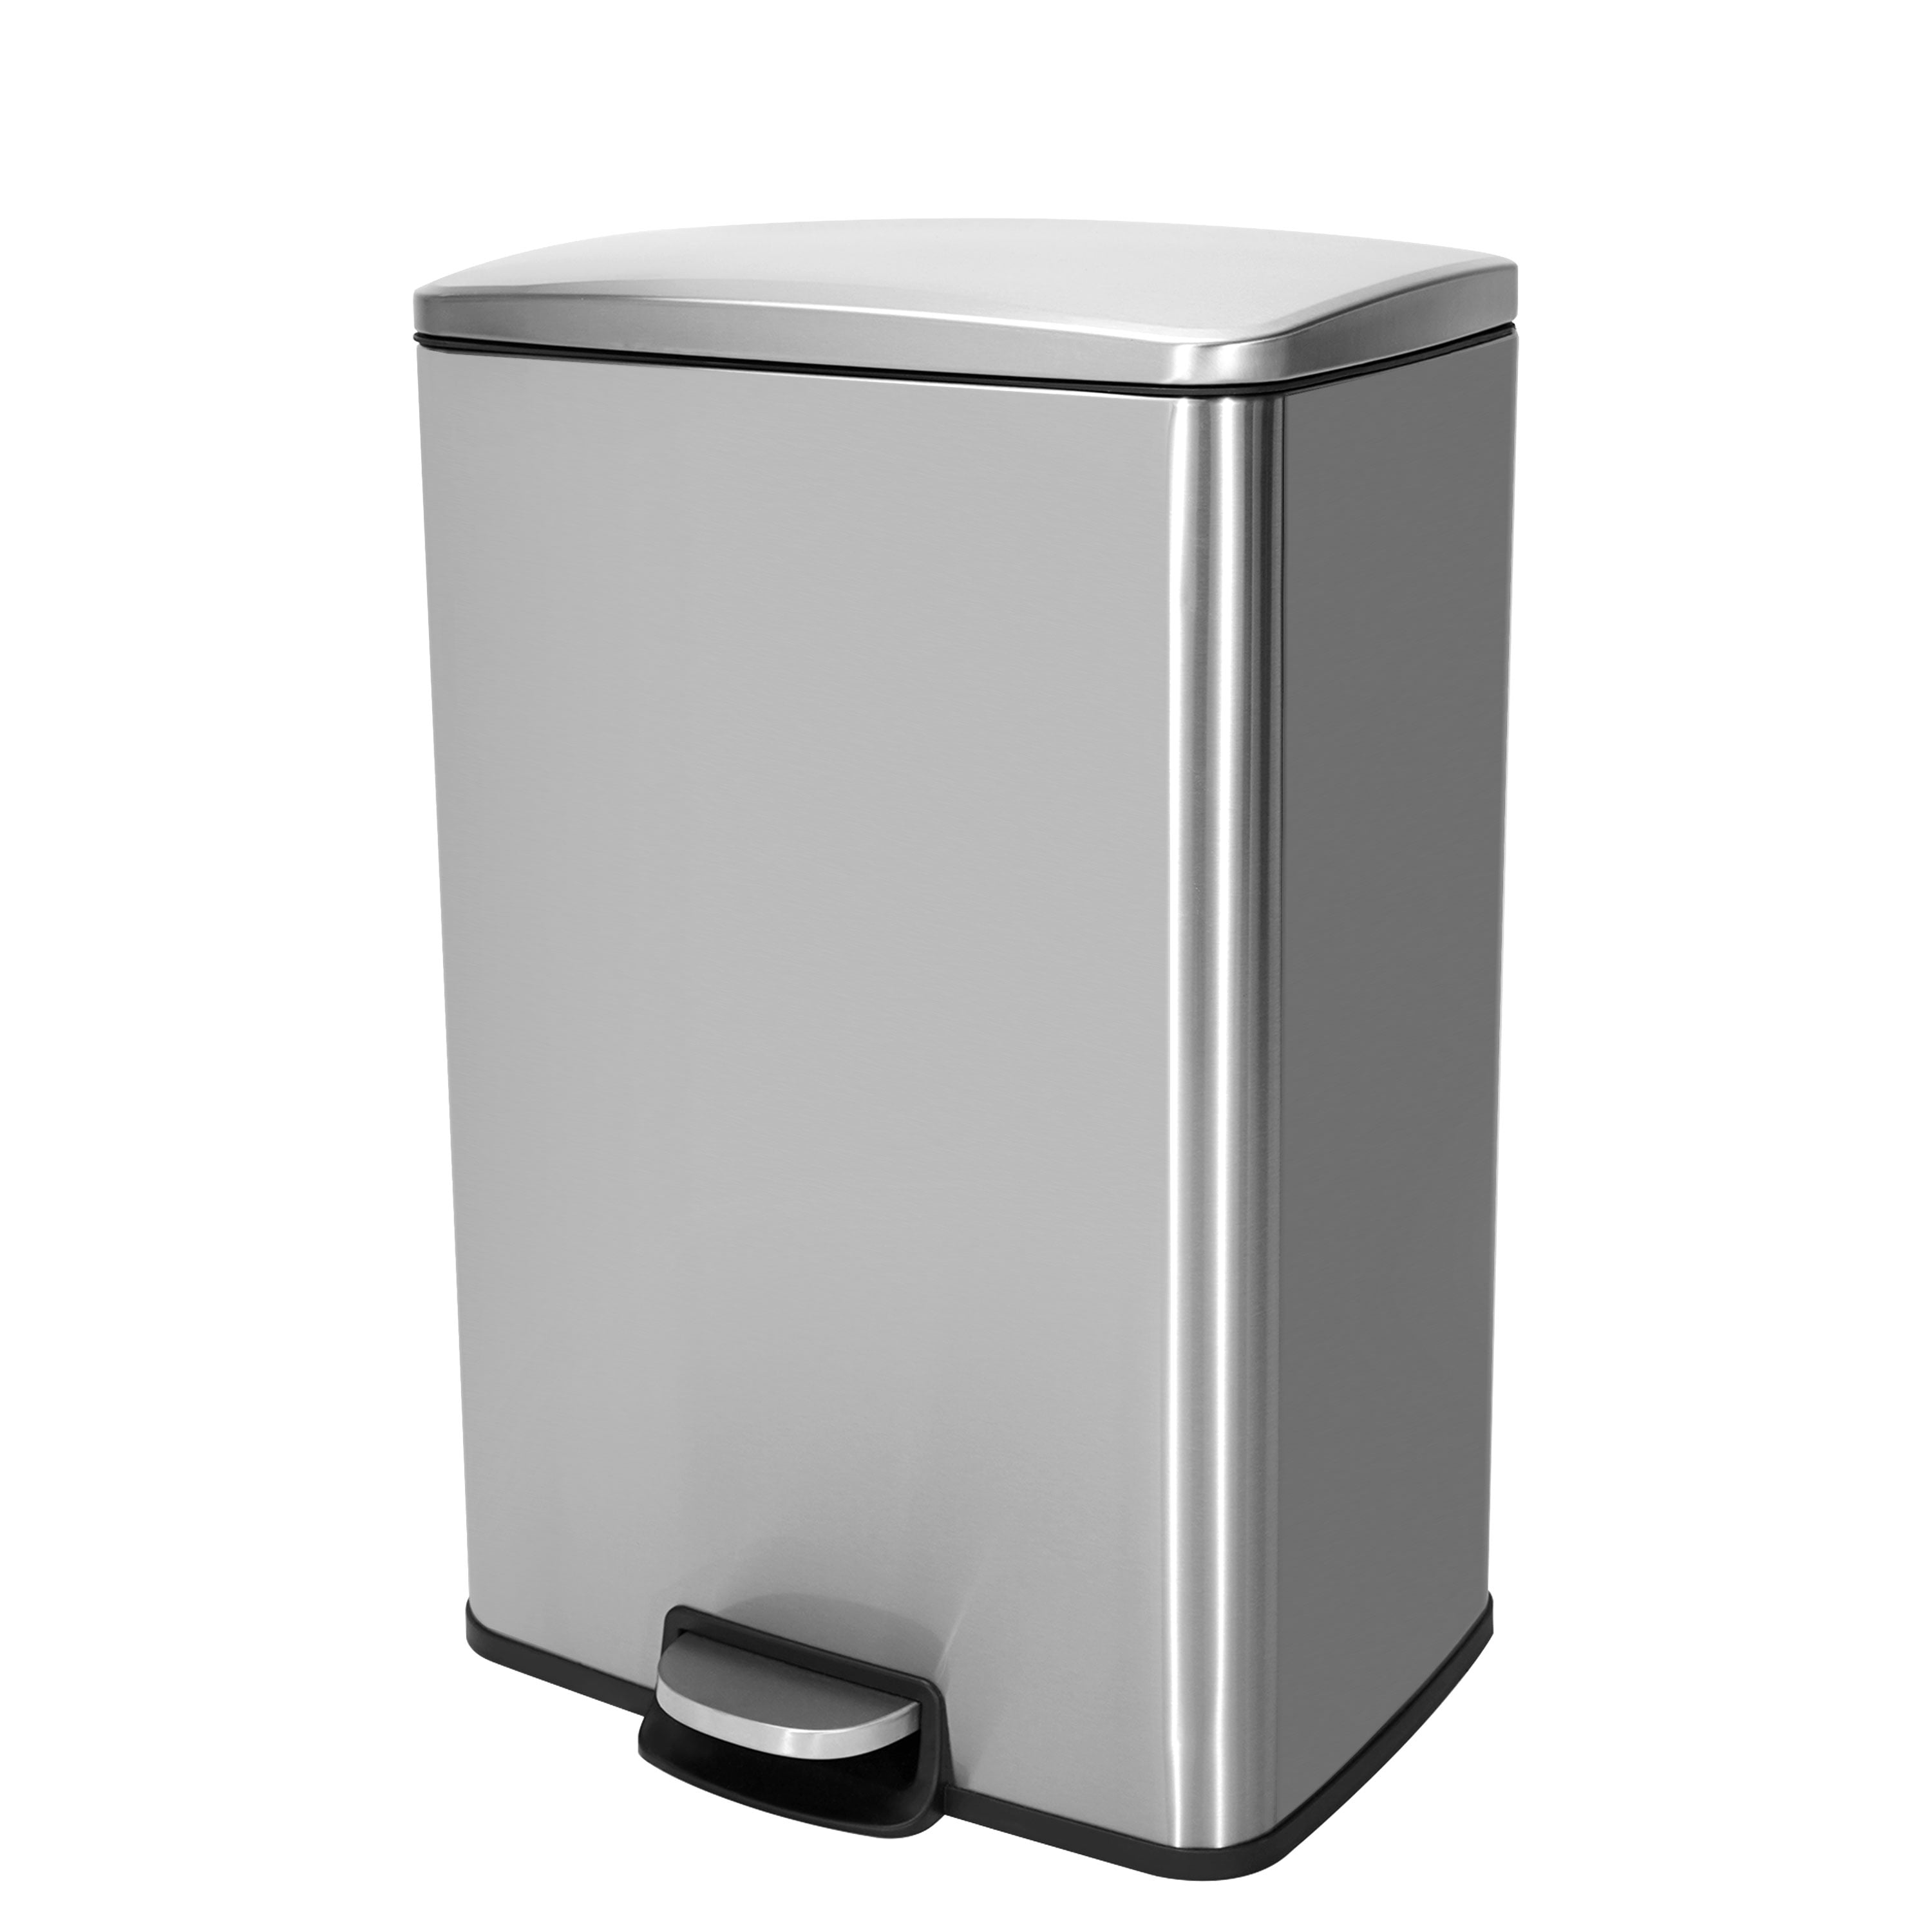 Innovaze 13 Gallon Stainless Steel Step Rectangular Kitchen Trash Can Stainless Steel Rectangle Trash Can